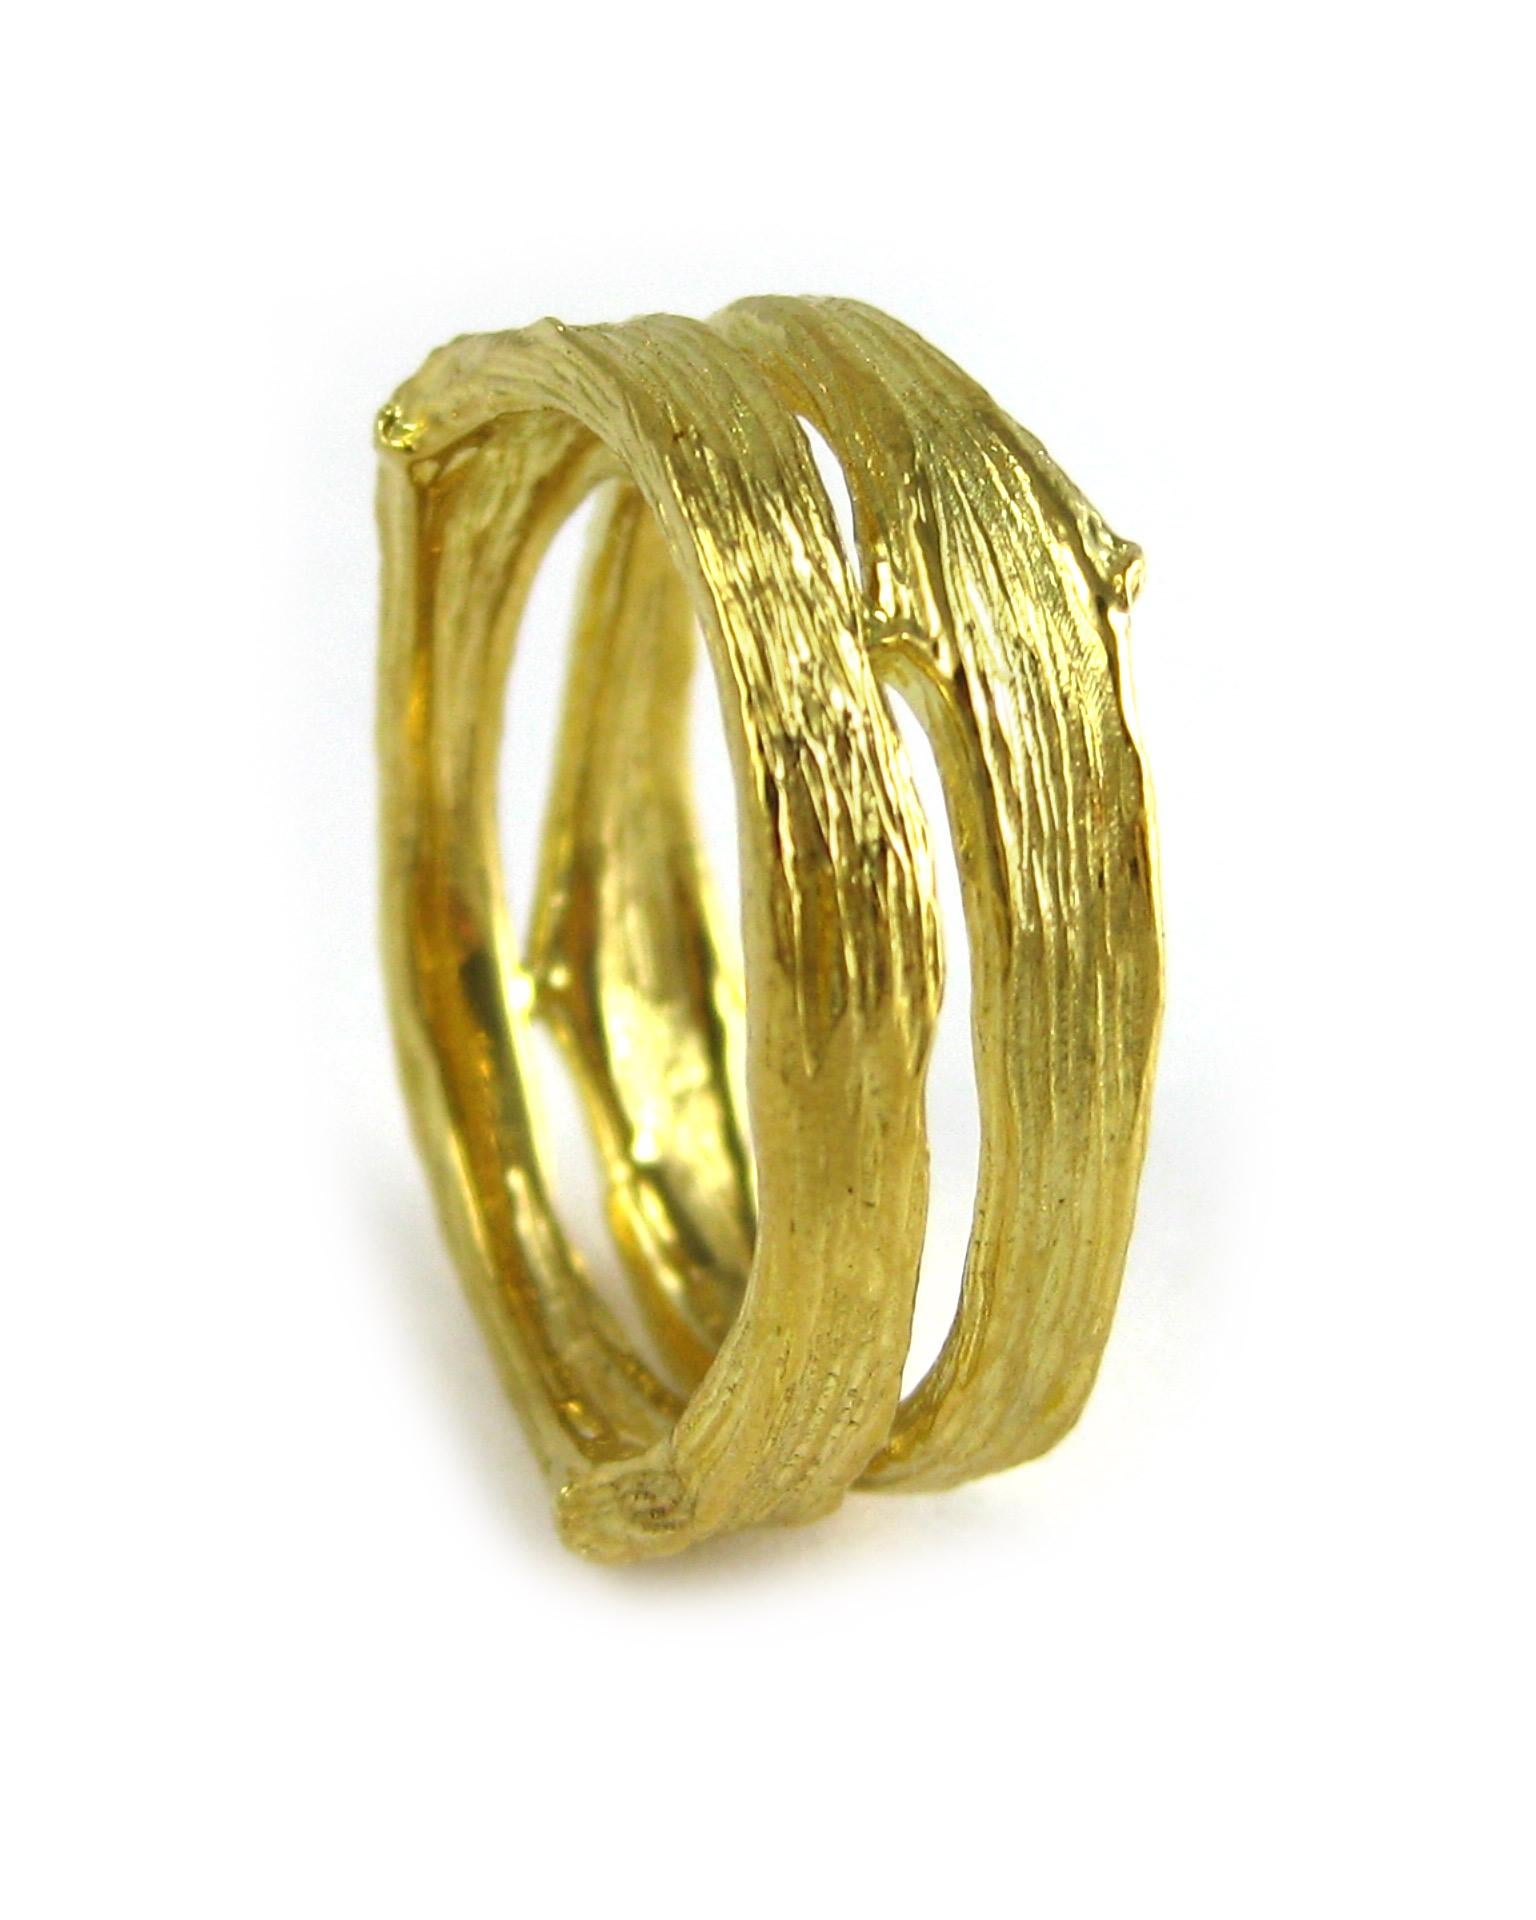 Channeling the eternal Tree of Life, the organic spirit of K. Brunini is captured through this Gents medium double-band Twig ring in 18k yellow gold. 

In the Twig Collection, nature exists alongside elegant luxuries, but the lines blur: Rough